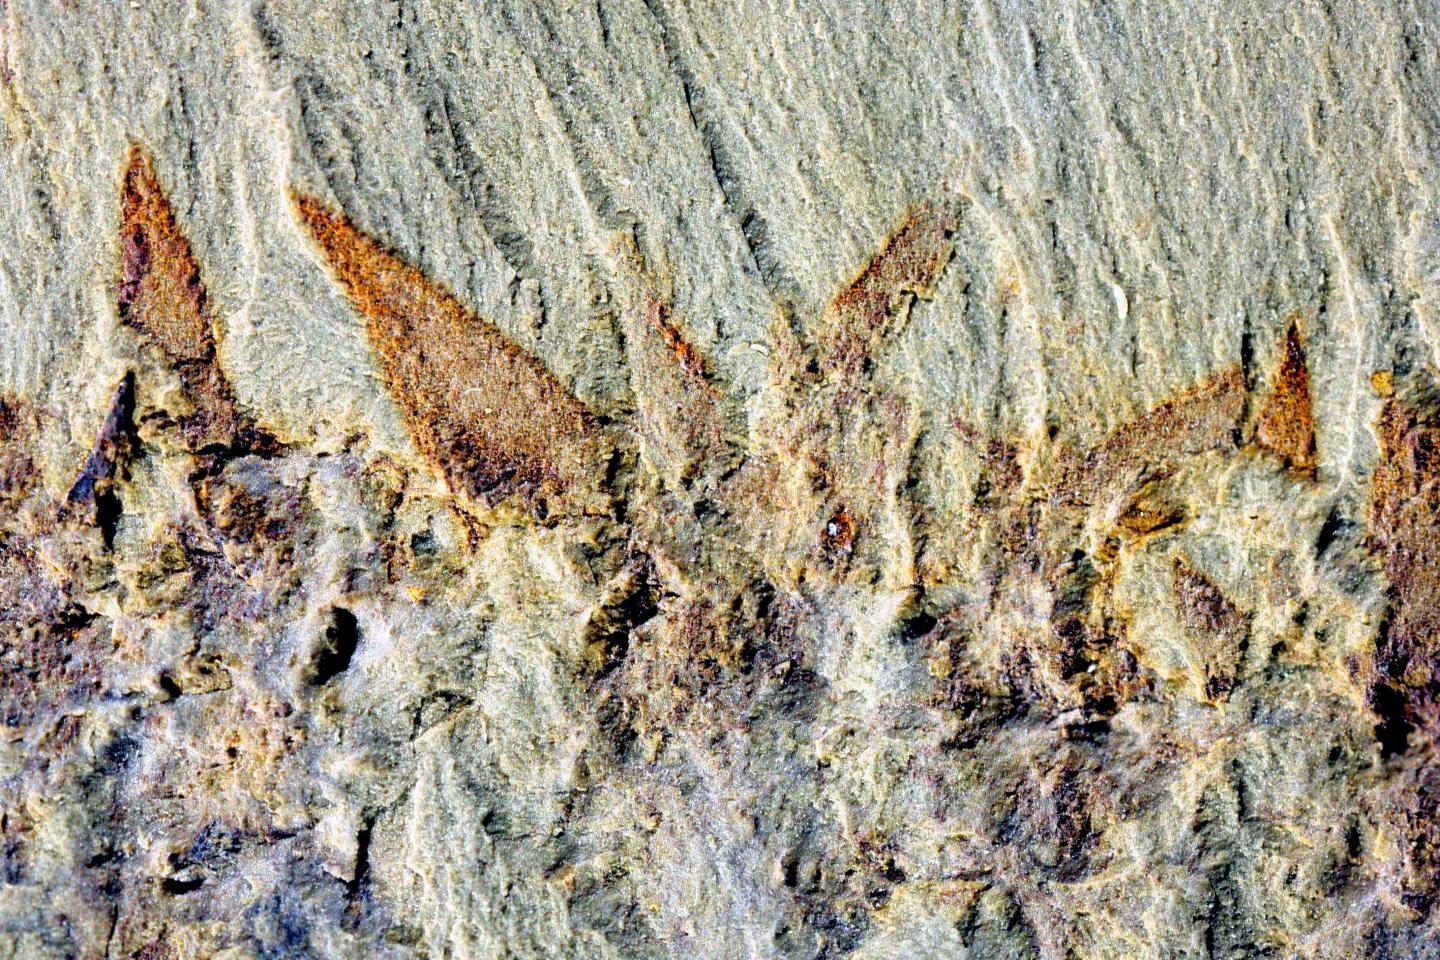 Spines at the Edge of the Animal